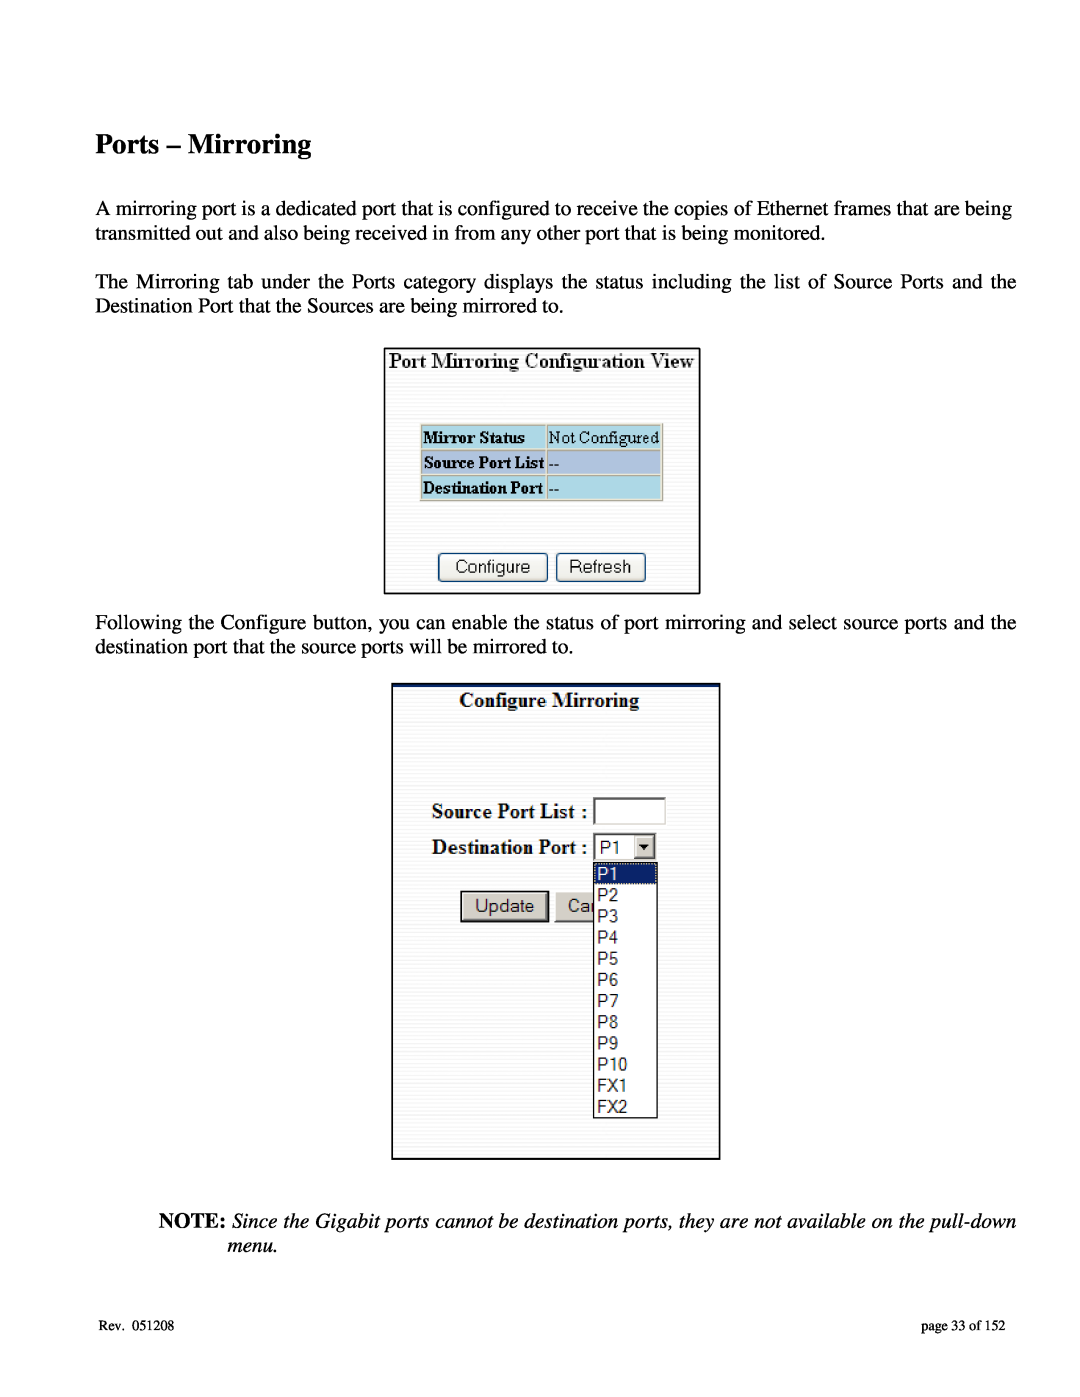 Gigabyte 7014 user manual Ports - Mirroring, page 33 of 